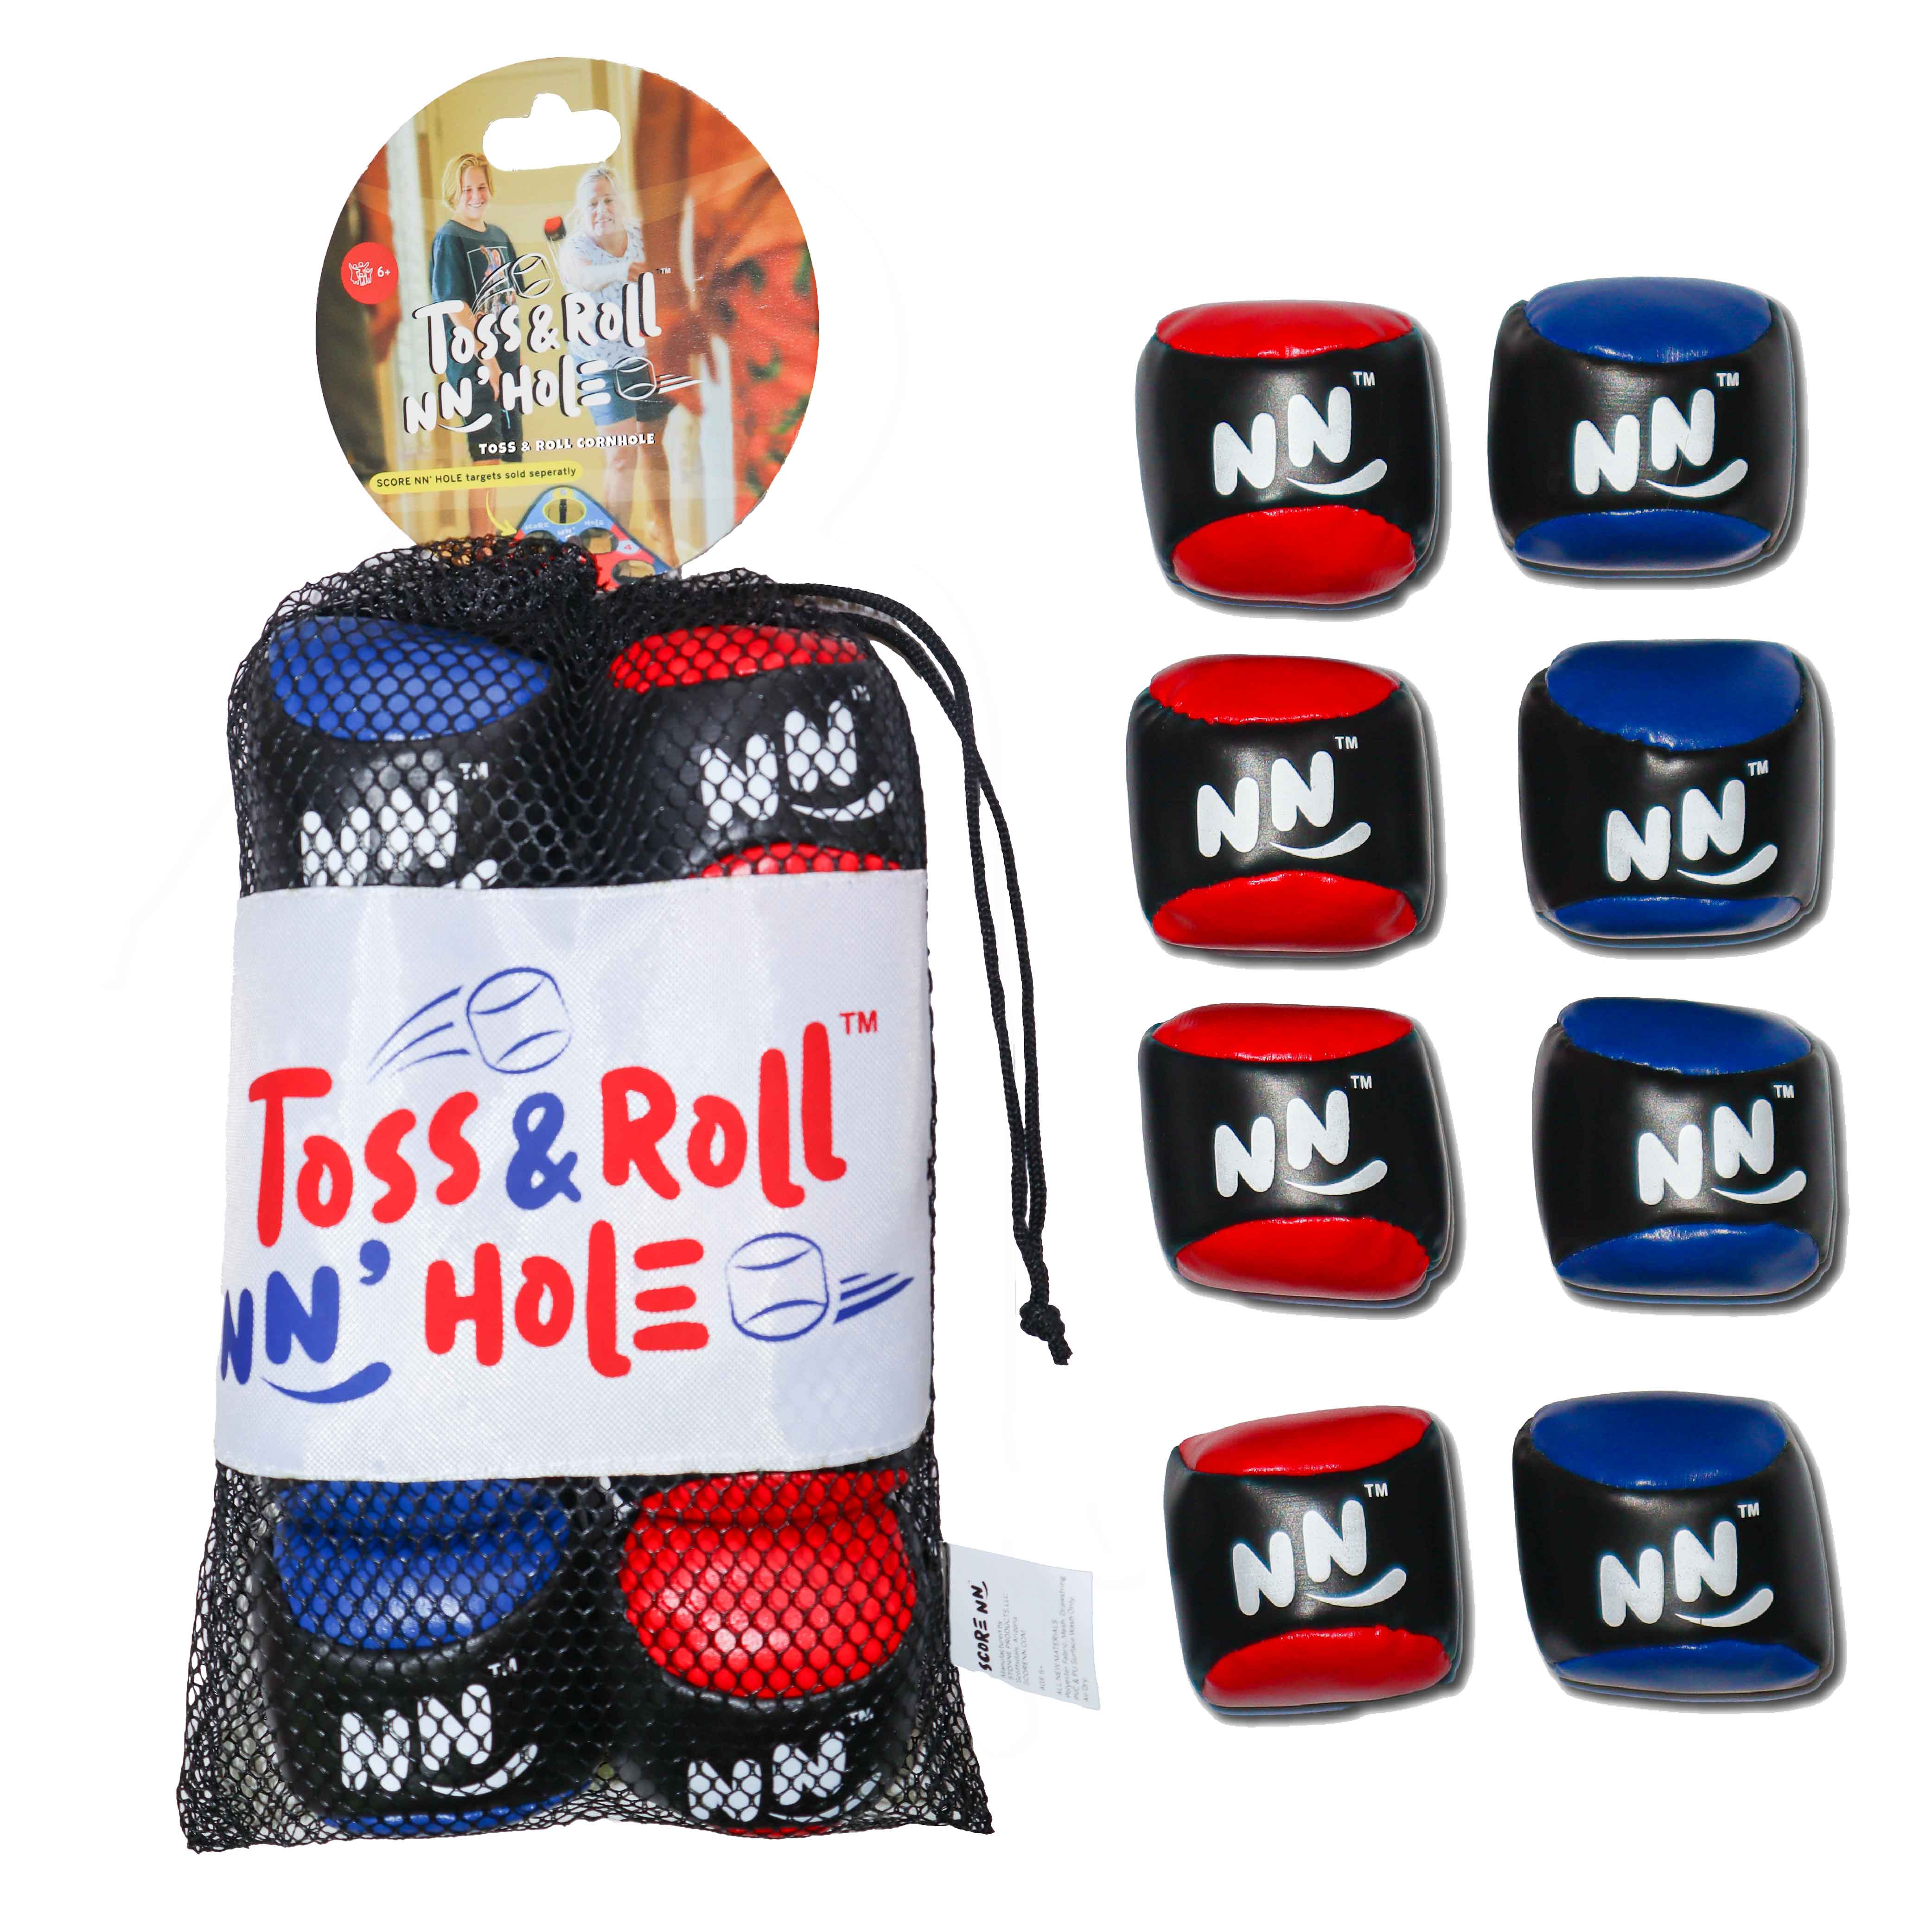 TOSS & ROLL NN' HOLE GAME MODE | Targets NOT Included | ROLL NN' HOLE & Land and Water Cornhole